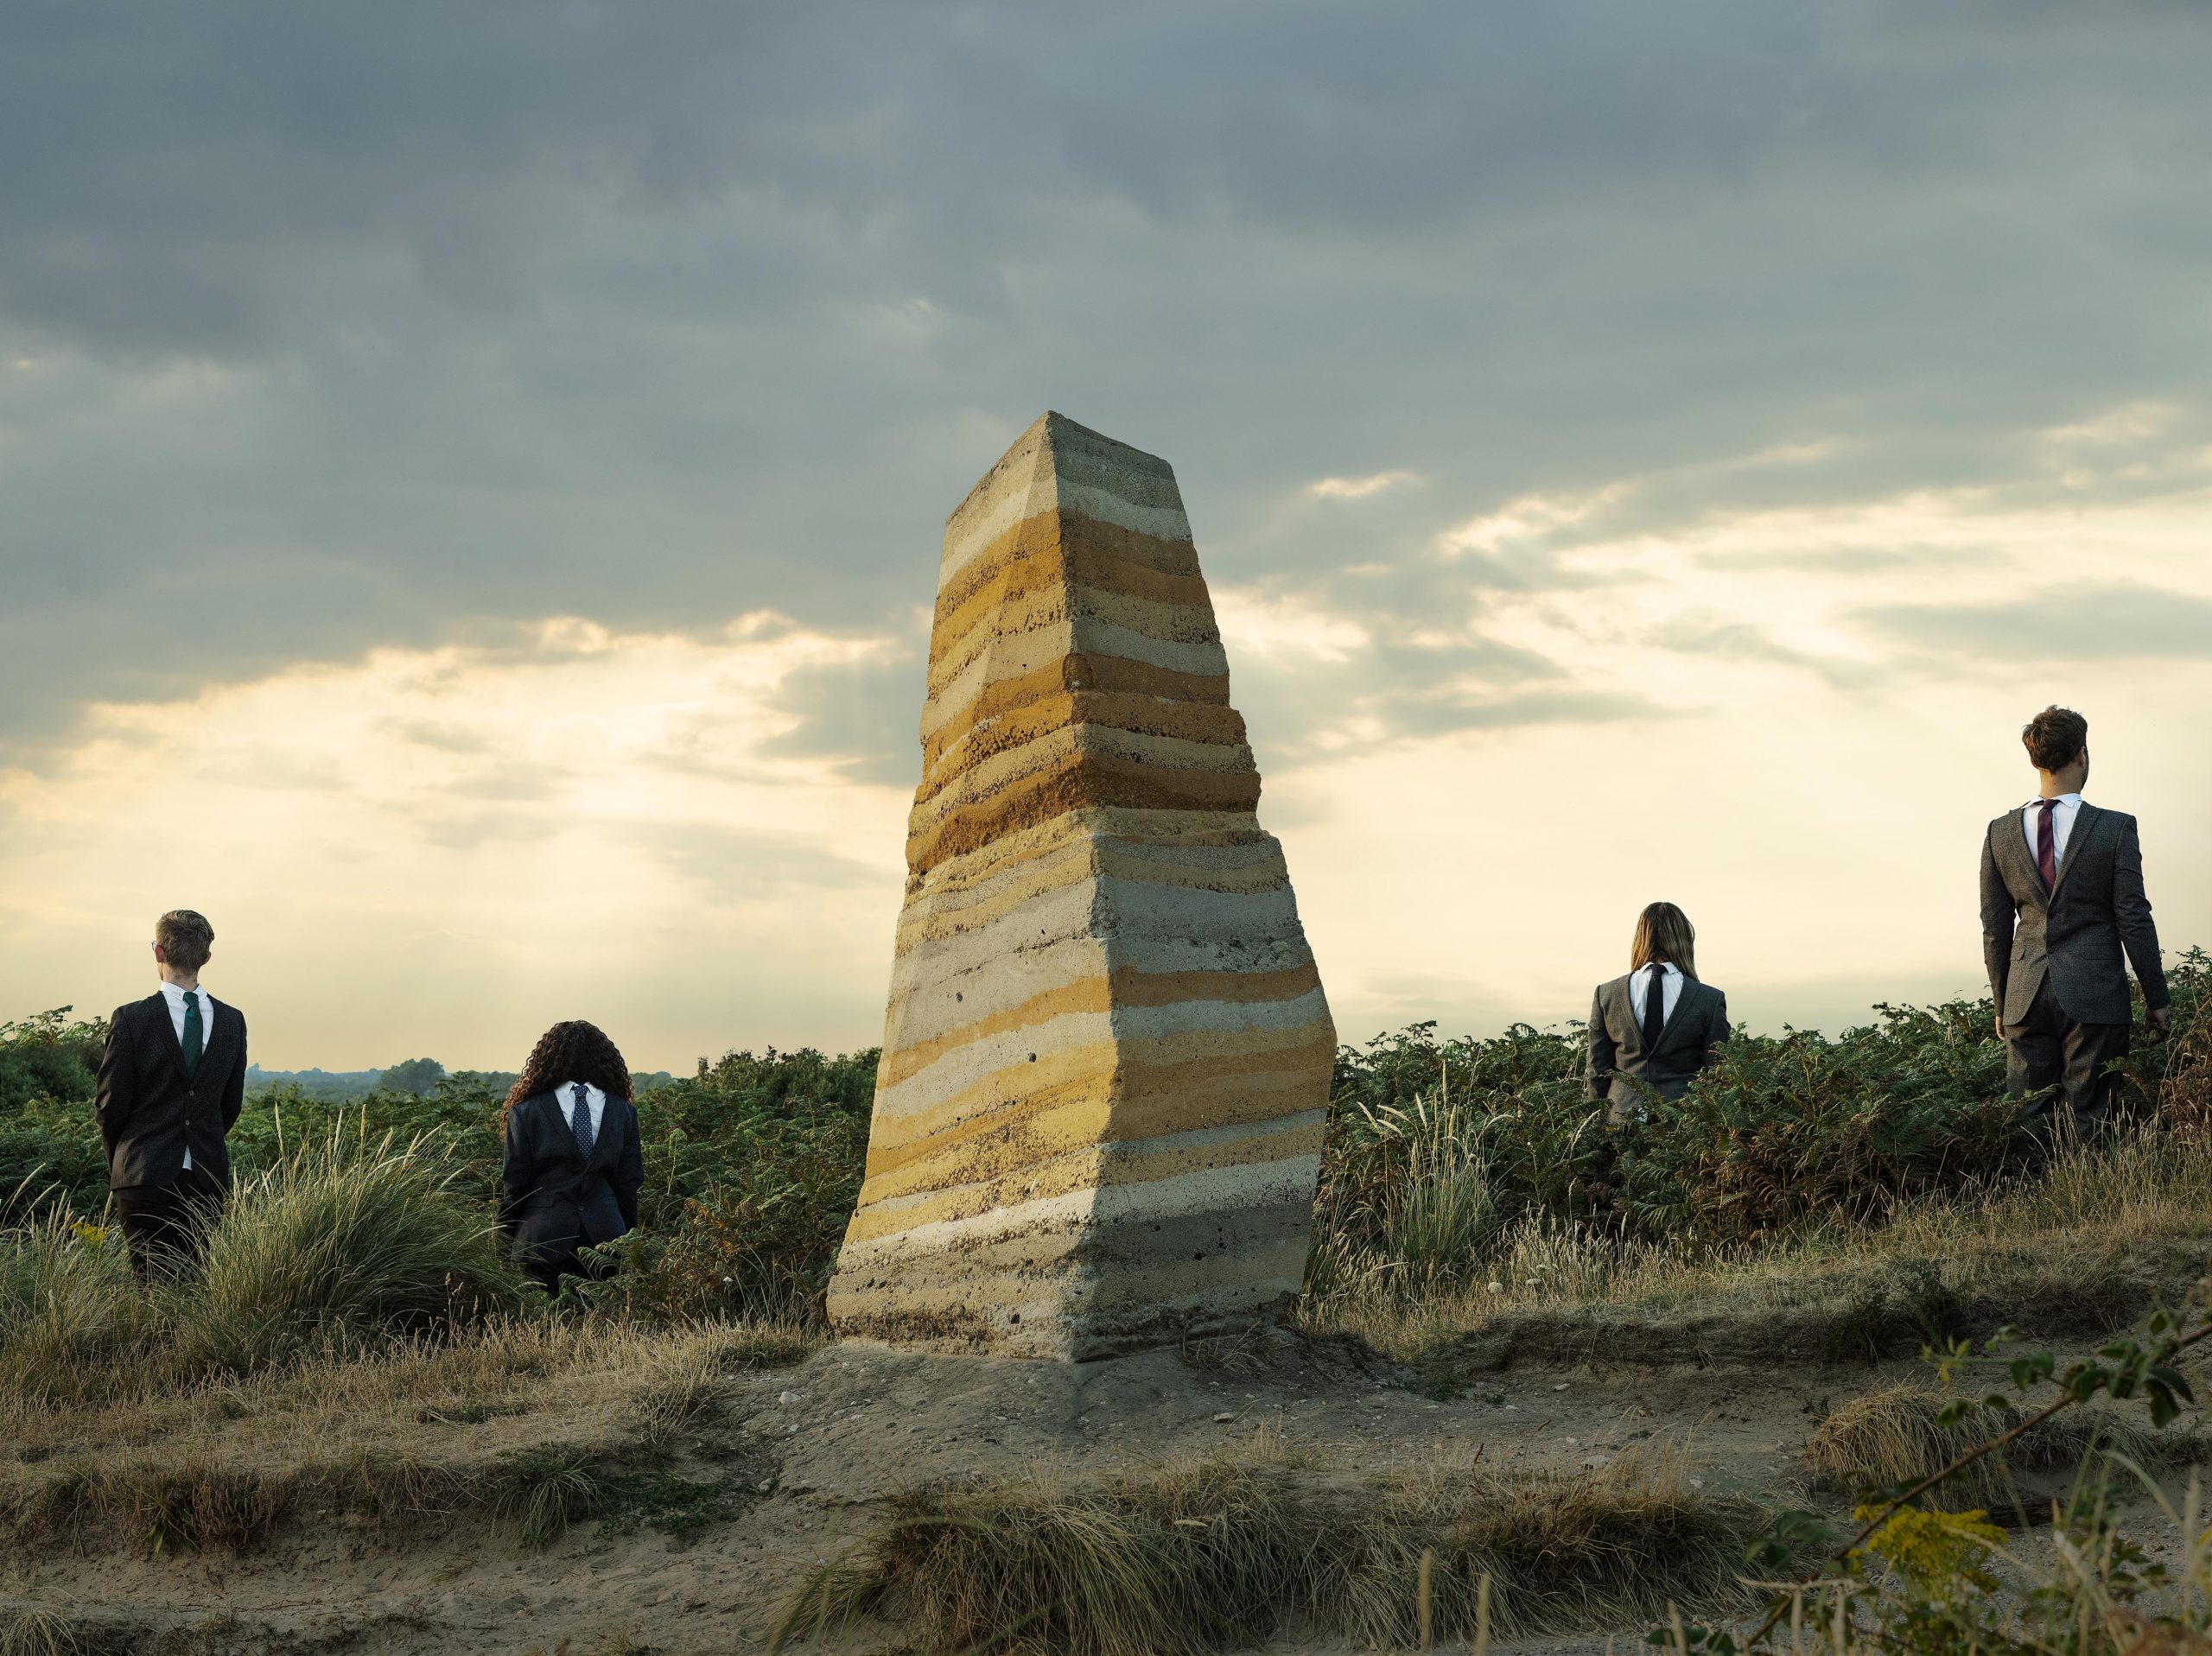 Photograph of four people wearing suits back to front standing around a monolith of rock